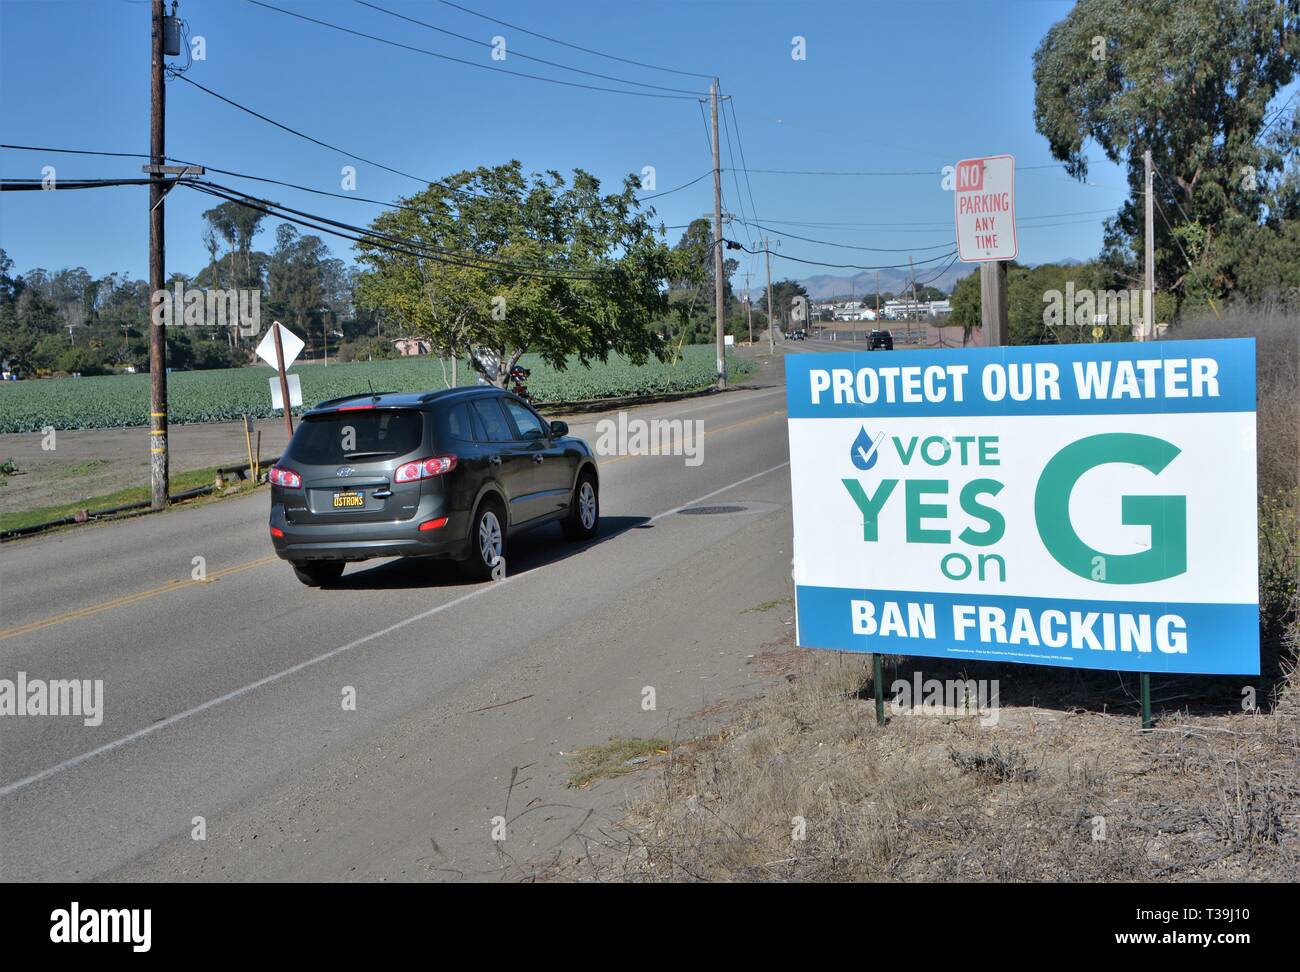 Political sign against fracking in the oil fields of California so as to protect the water table which is the drinking water for locals Stock Photo